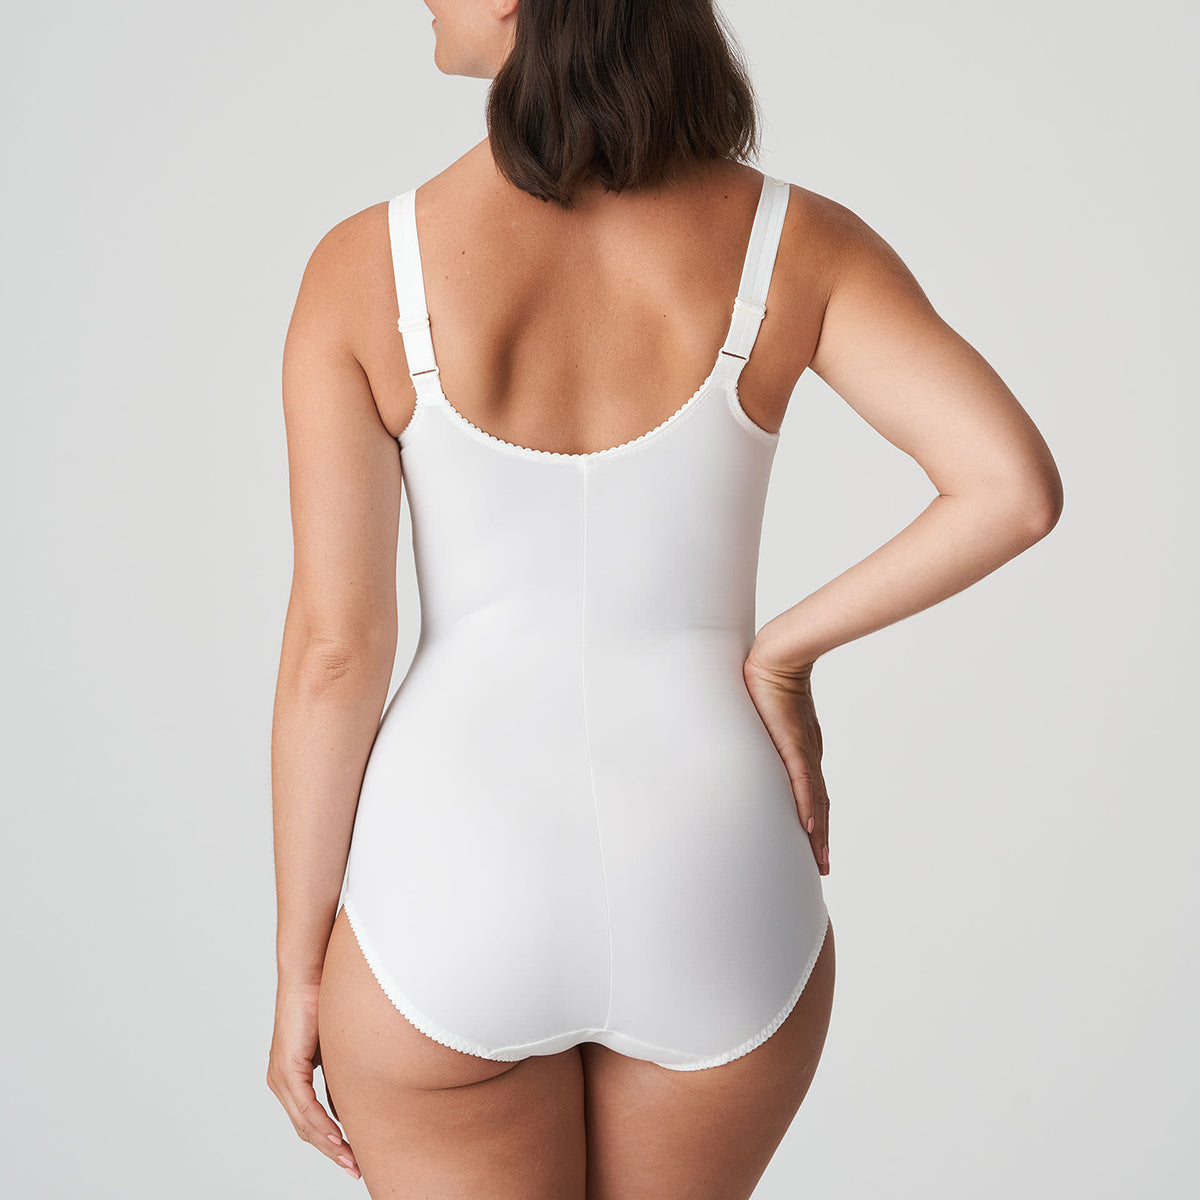 Prima Donna Deauville Underwire Shapewear Body Smoother Style 0461810